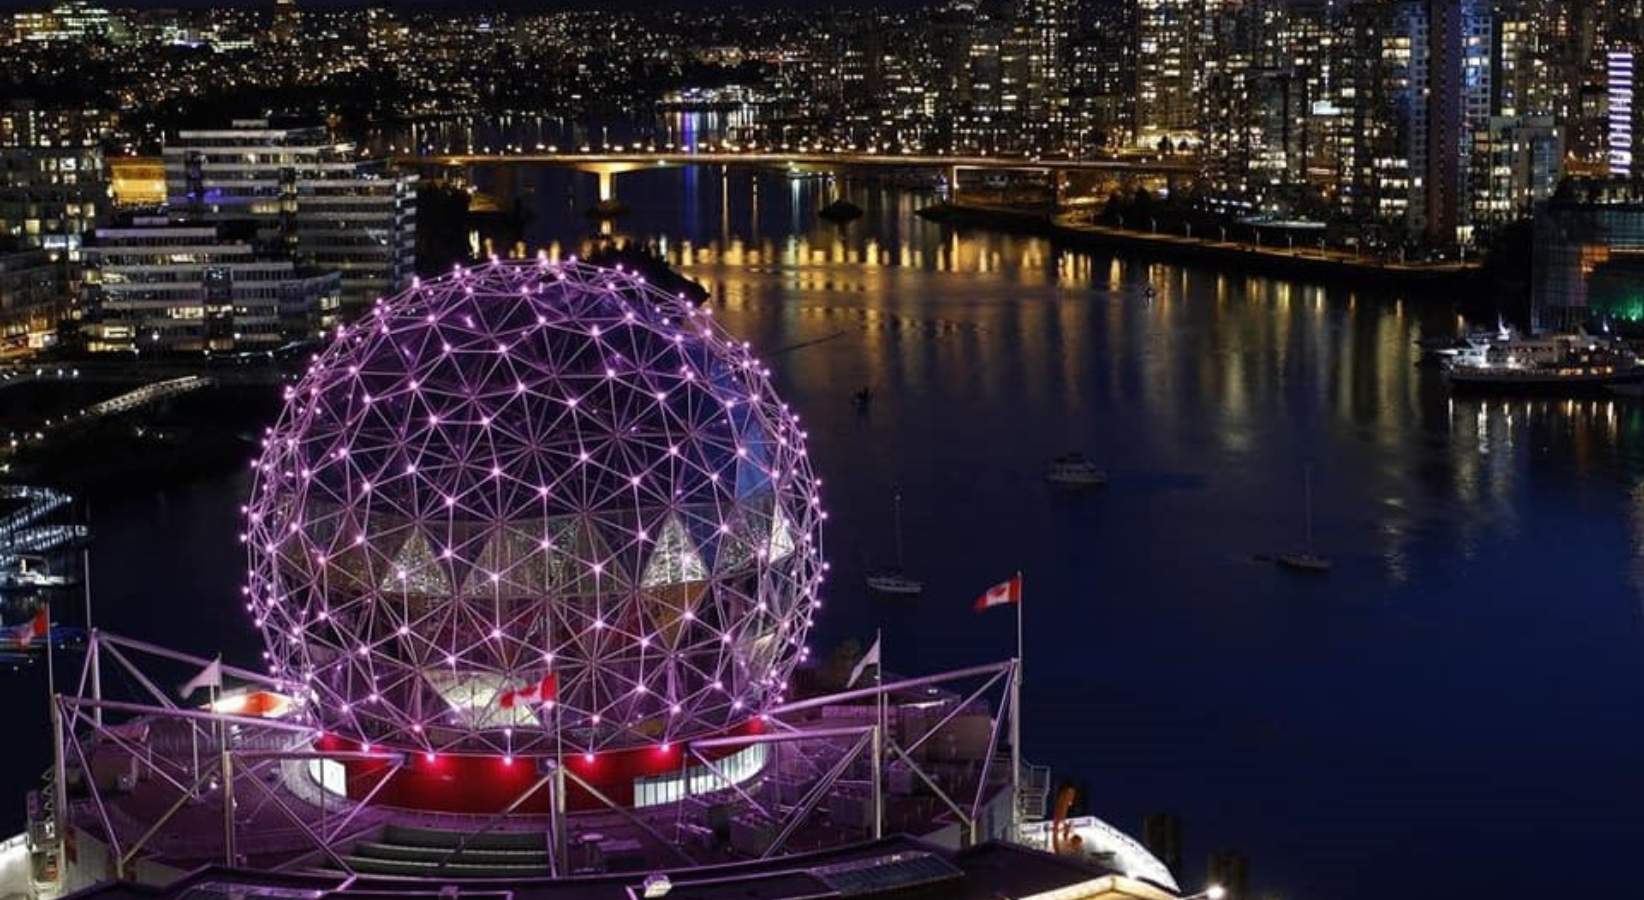 Science World Vancouver lit with purple lights and the city in the background.